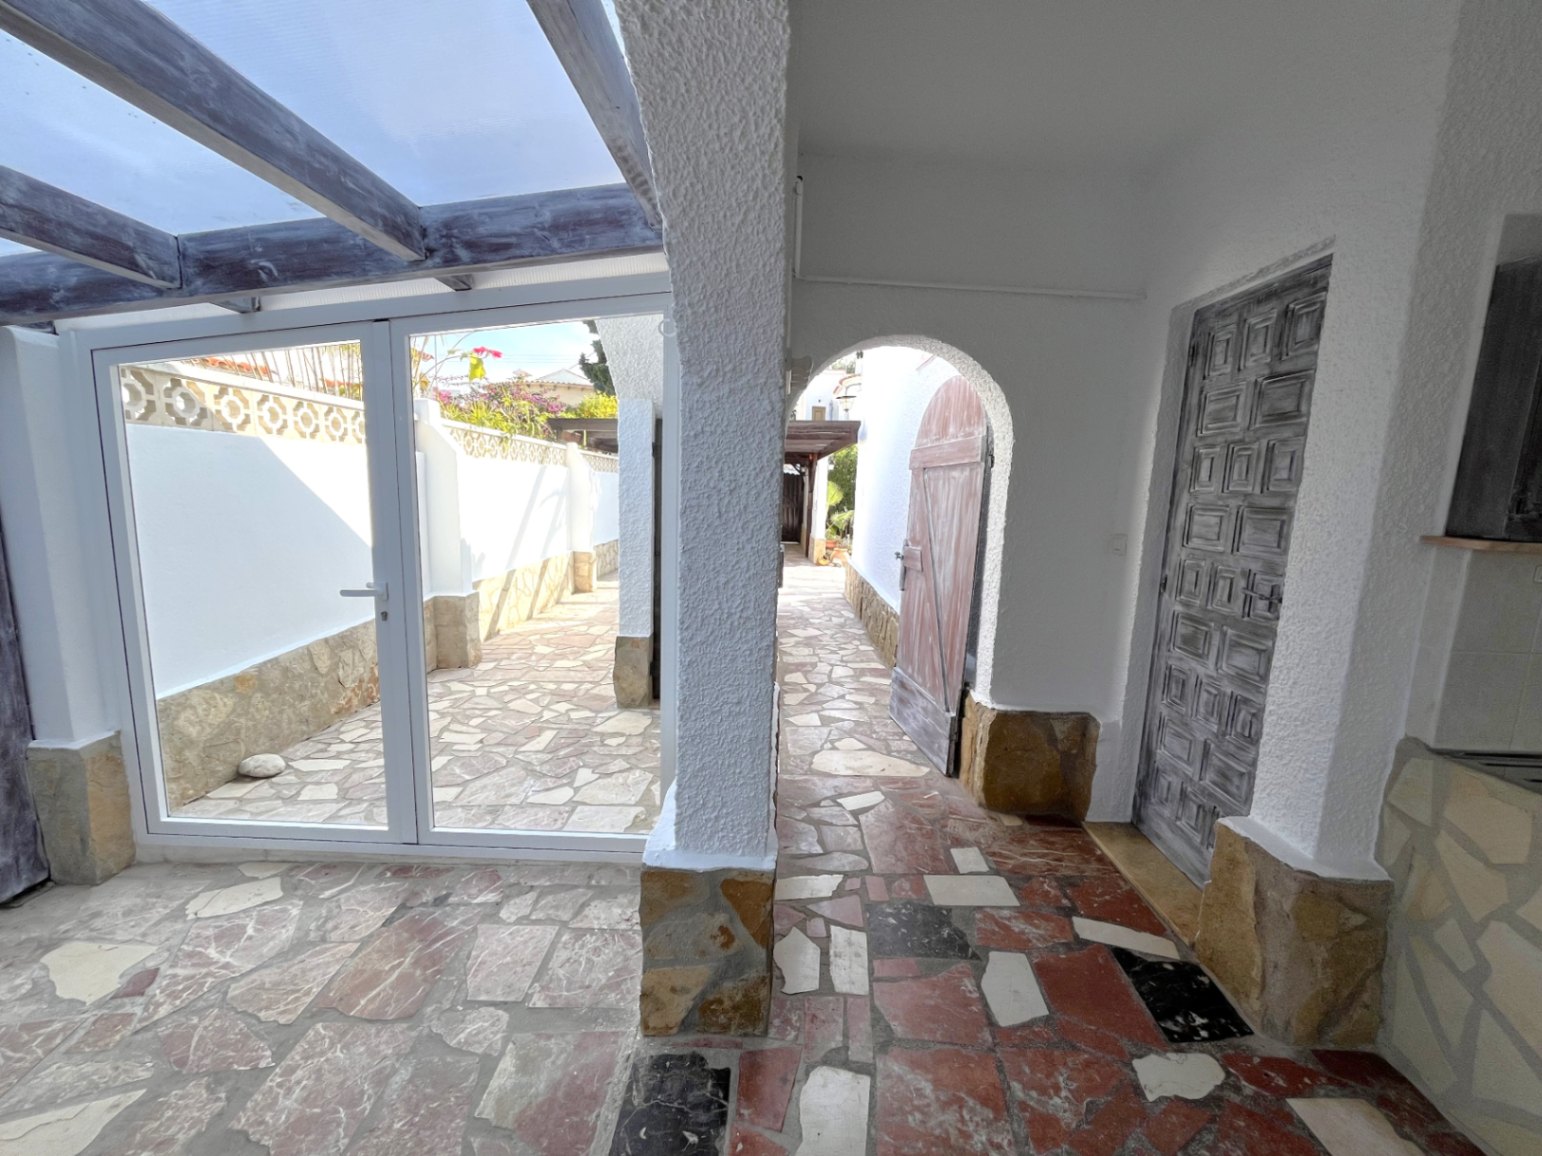 Detached villa with guest room in Els Poblets